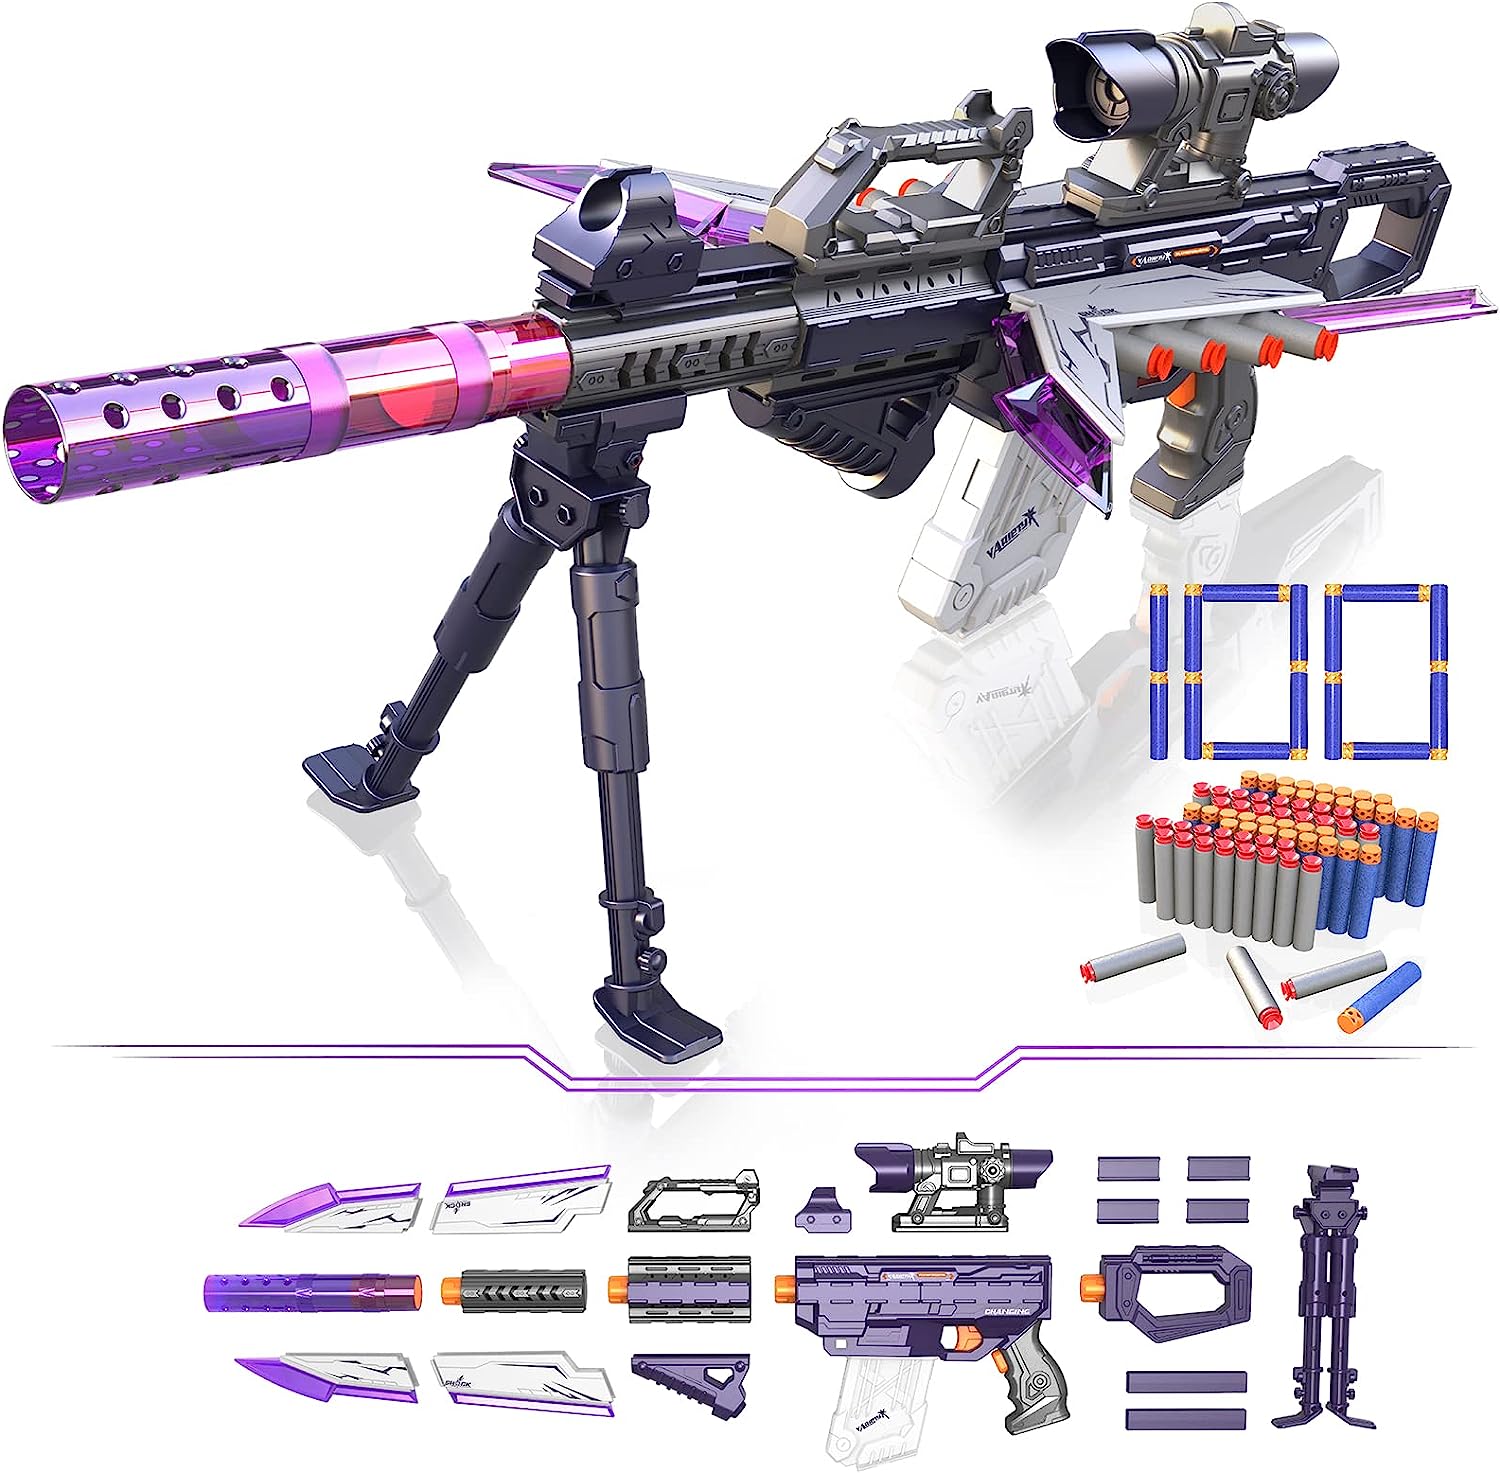 AURIDA Toy Sniper Rifle for Nerf Blasters, 100+ Styles Toy Foam Blasters &  Toys, Gift for Kids Ages 8-12, Birthday, Christmas - with Bracket